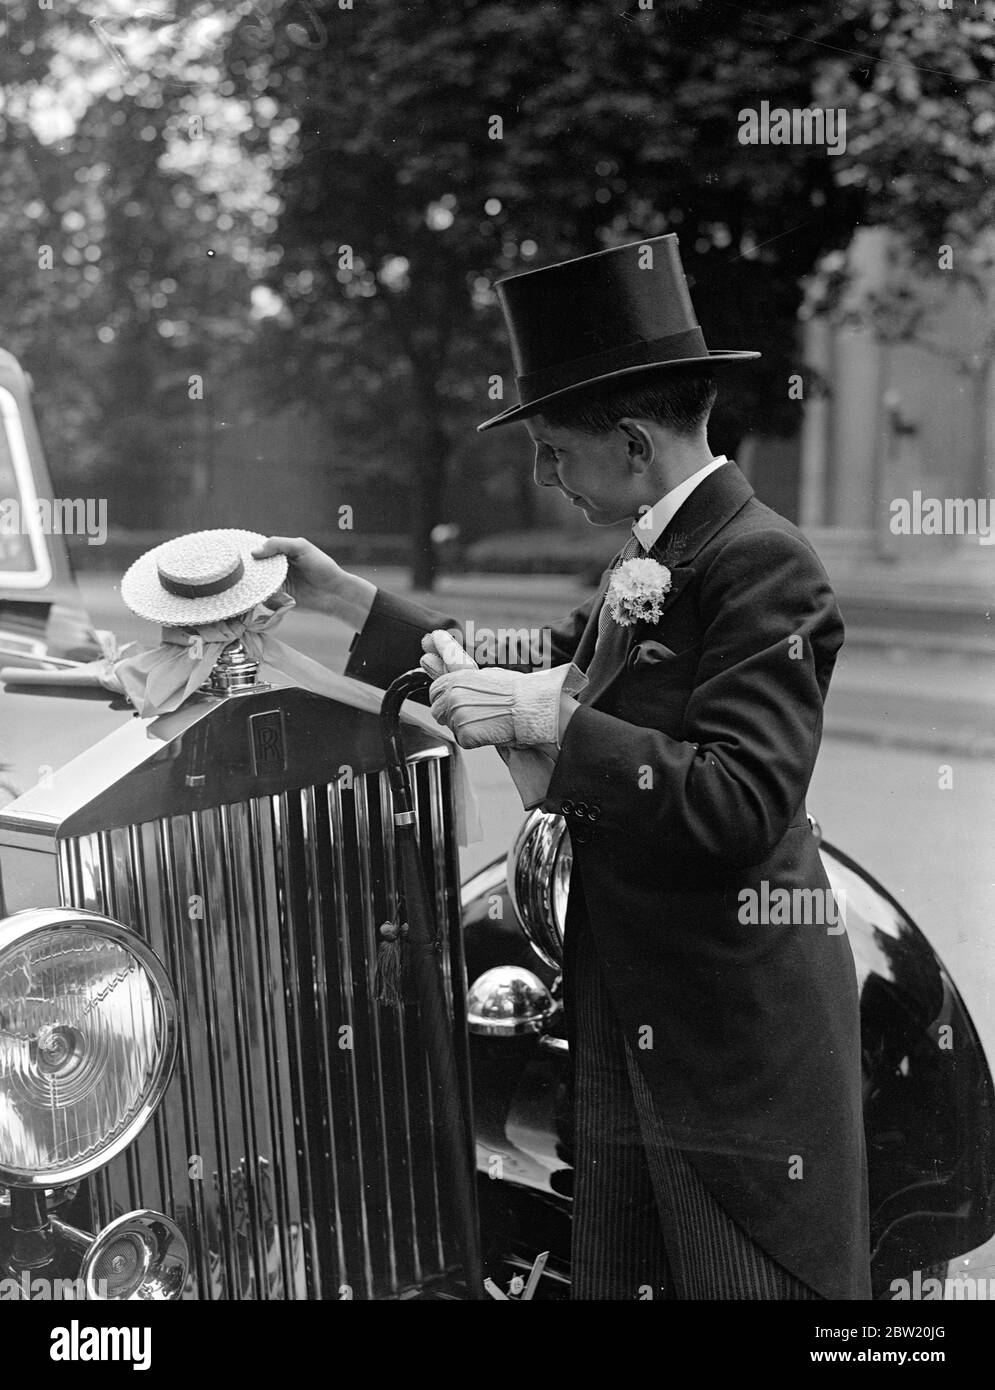 Bryan Adams, a Harrow boy with a Harrow hat car mascot at Lord's where the Eton - Harrow cricket match had started. Harrow are attempting to score the first cricket win since 1908 over their great rivals, Eton, in the annual two-day match. 9 July 1937 Stock Photo